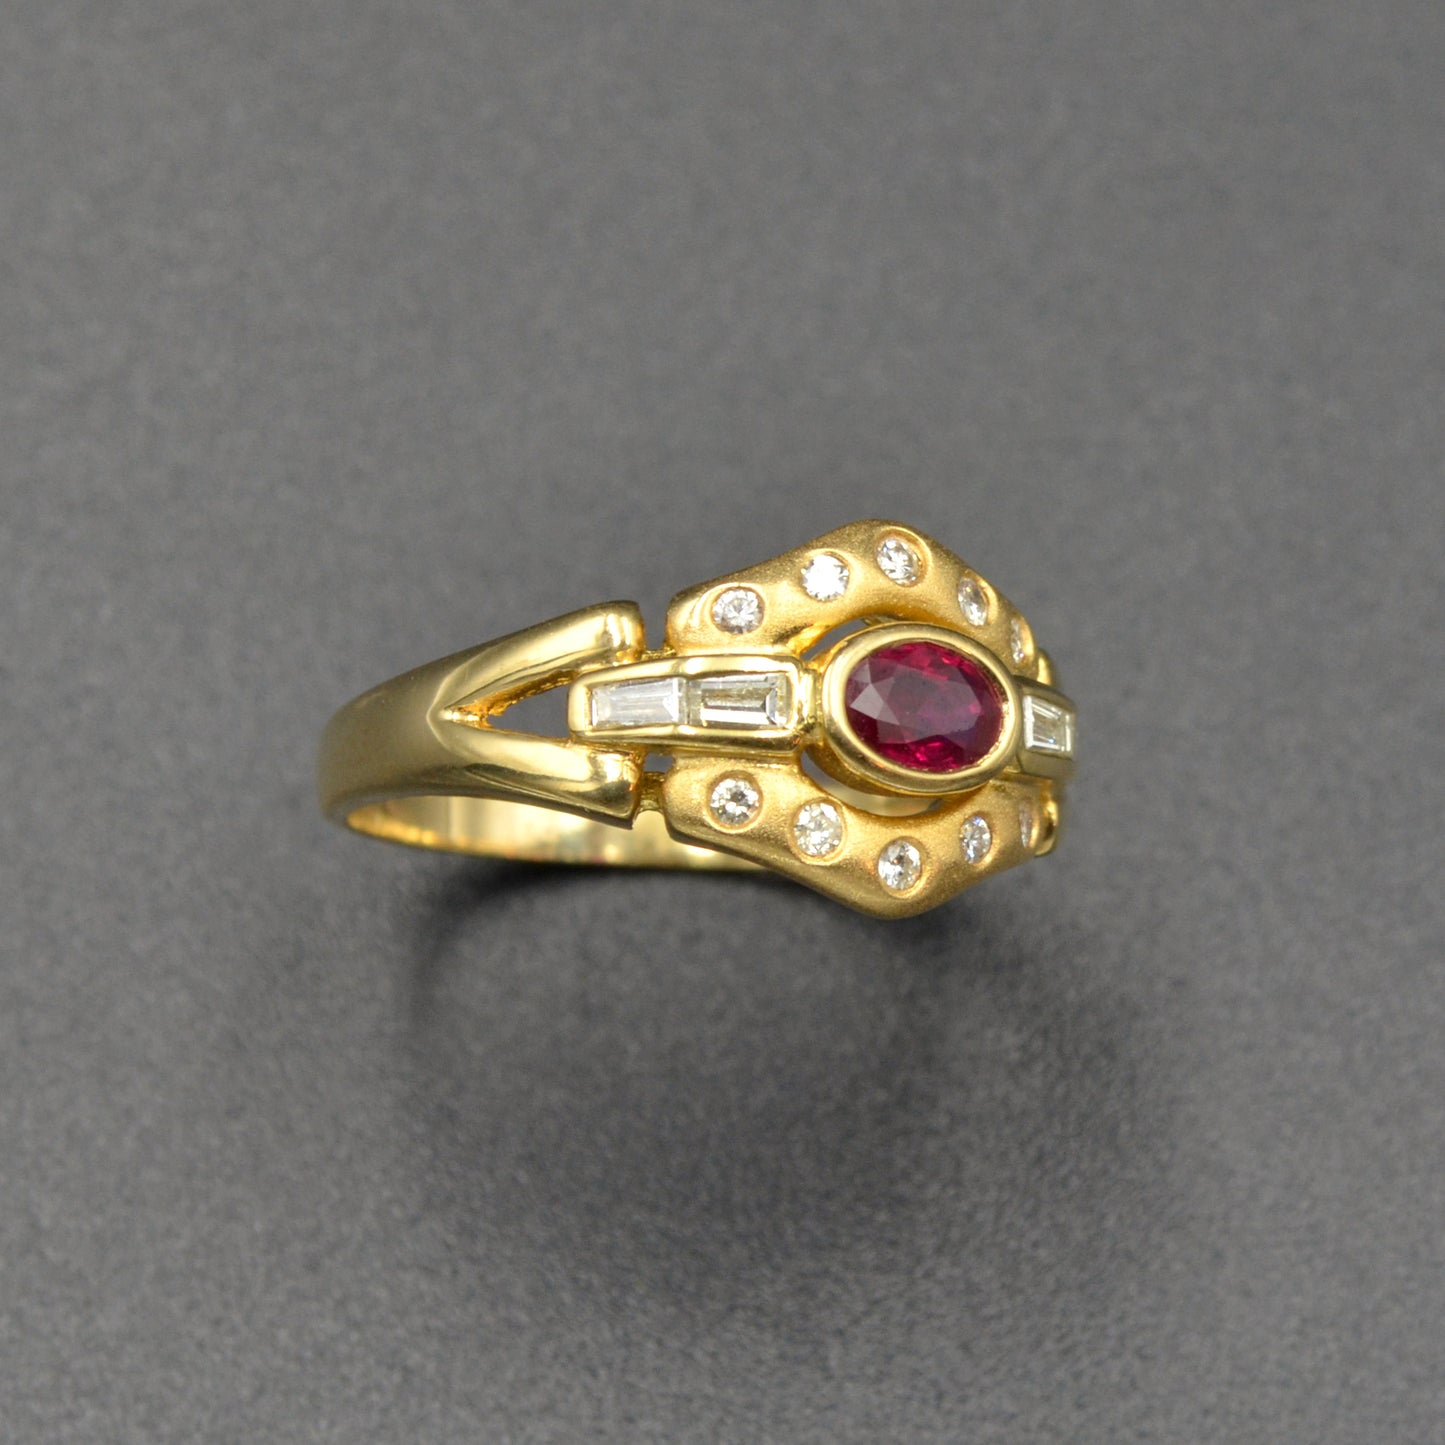 Vintage Ruby, Diamond and 18k Gold Ring